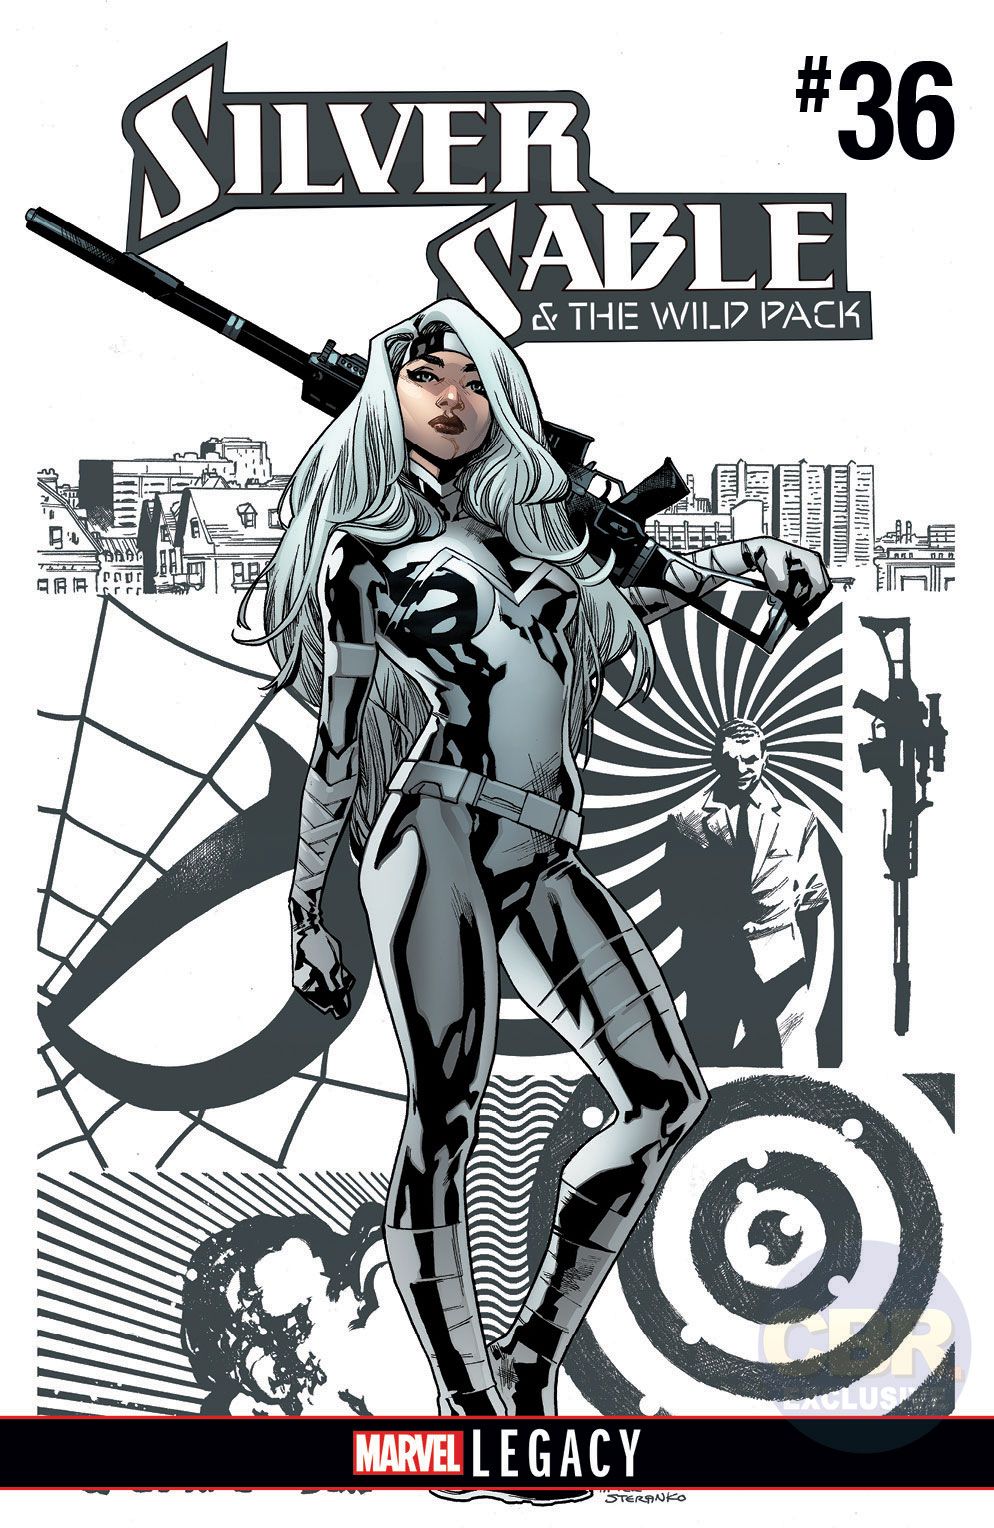 silver-sable-wild-pack